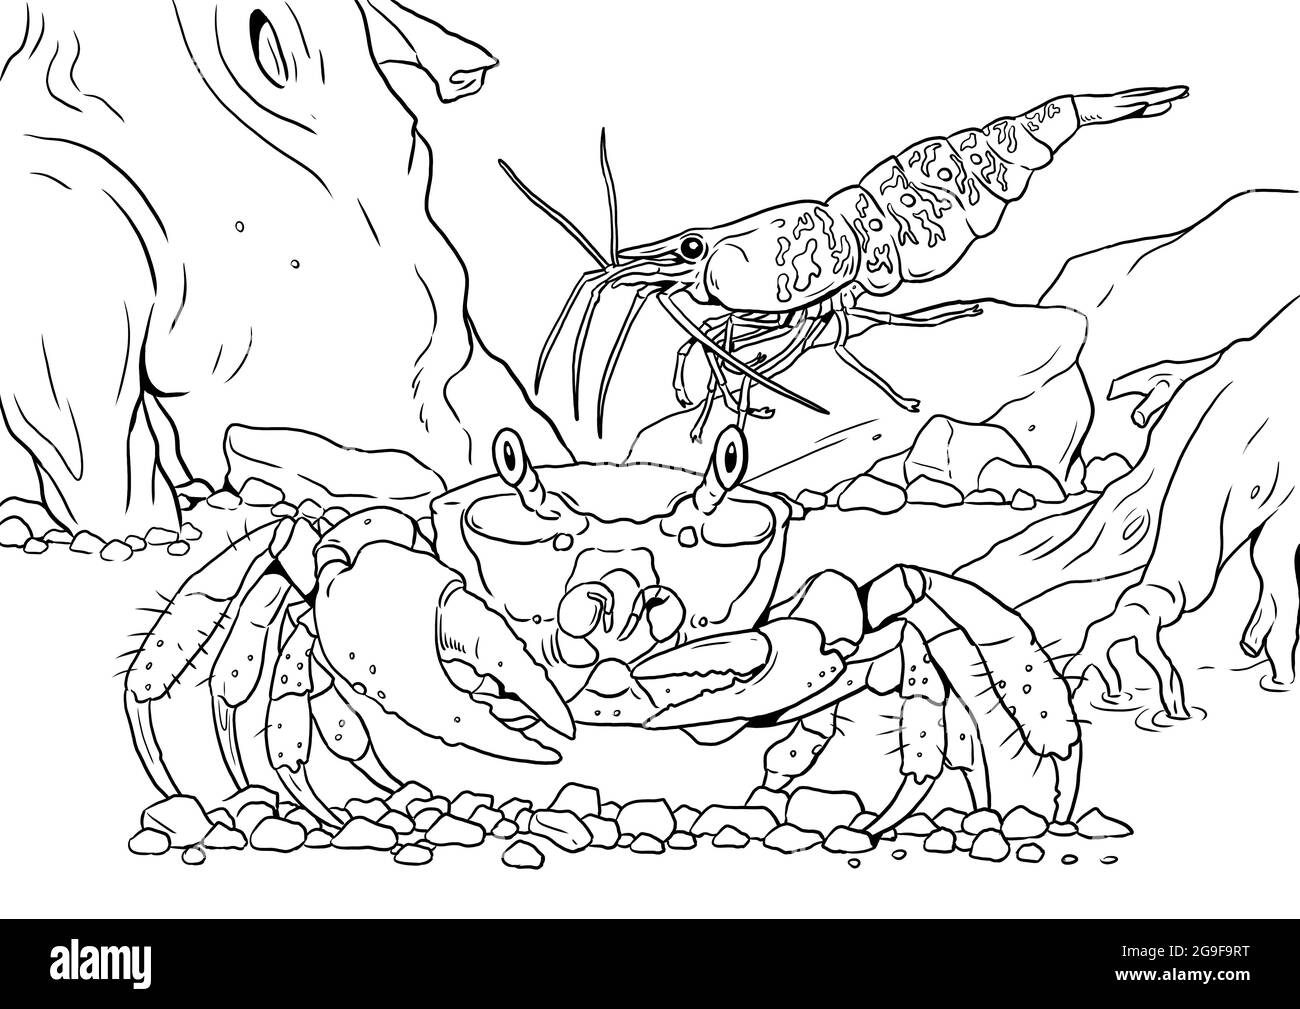 Tropical marine crab with prawn. Colorful sea animals digital template. Coloring book for children and adults. Stock Photo